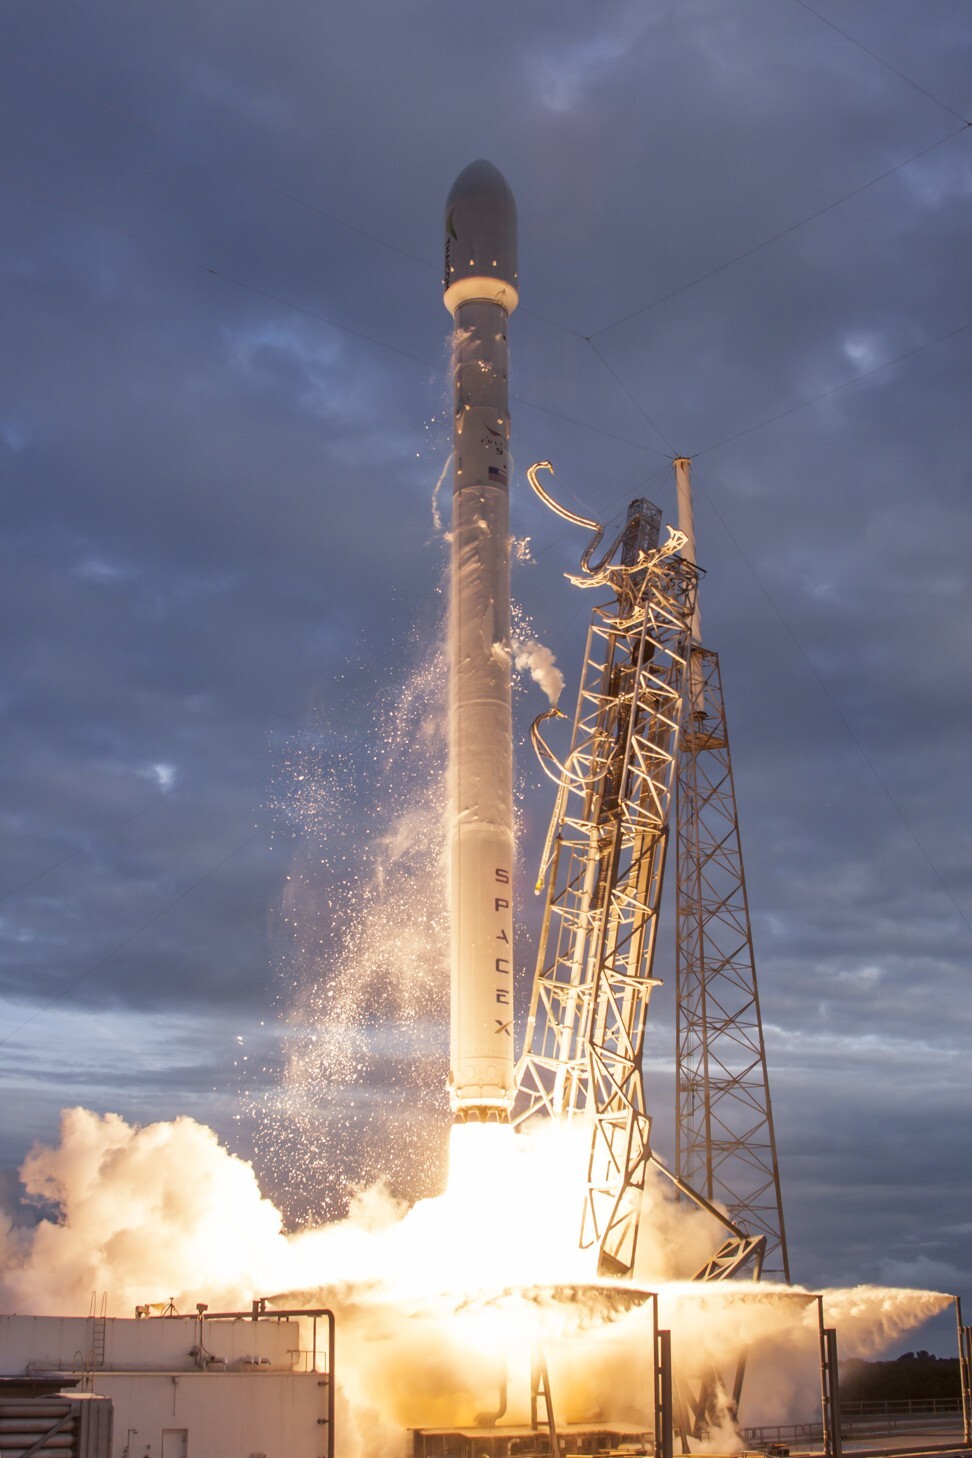 A SpaceX Falcon 9 rocket blasts off from Florida’s Cape Canaveral Air Force Station in January 2014 carrying the THAICOM 6 satellite to orbit. Photo: Getty Images